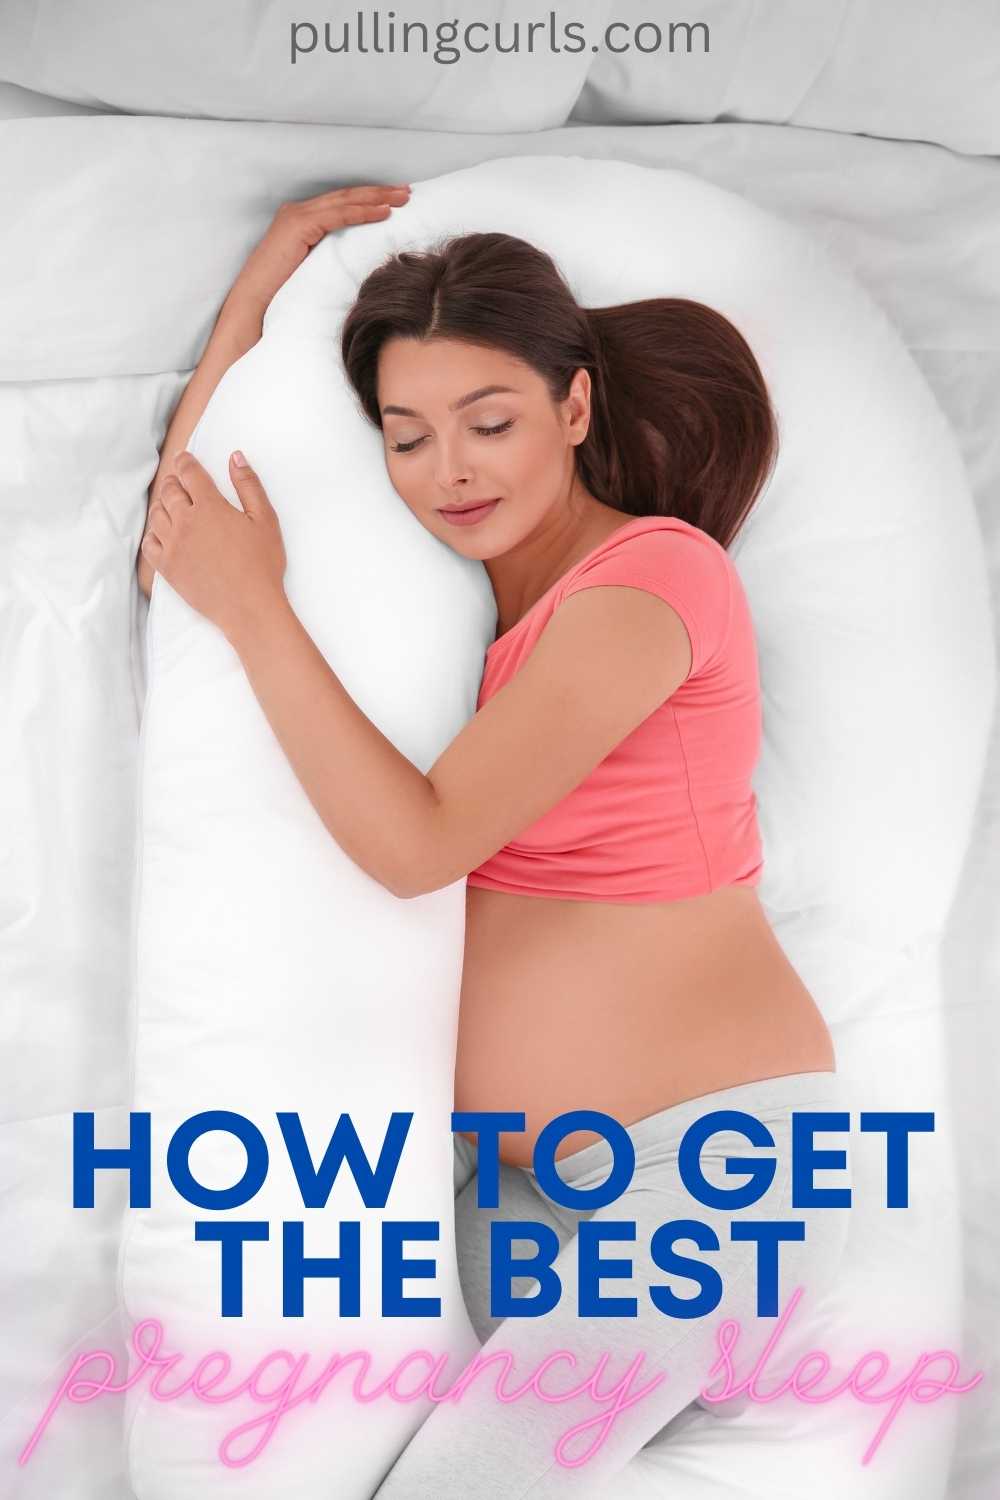 How can I sleep better during pregnancy? via @pullingcurls